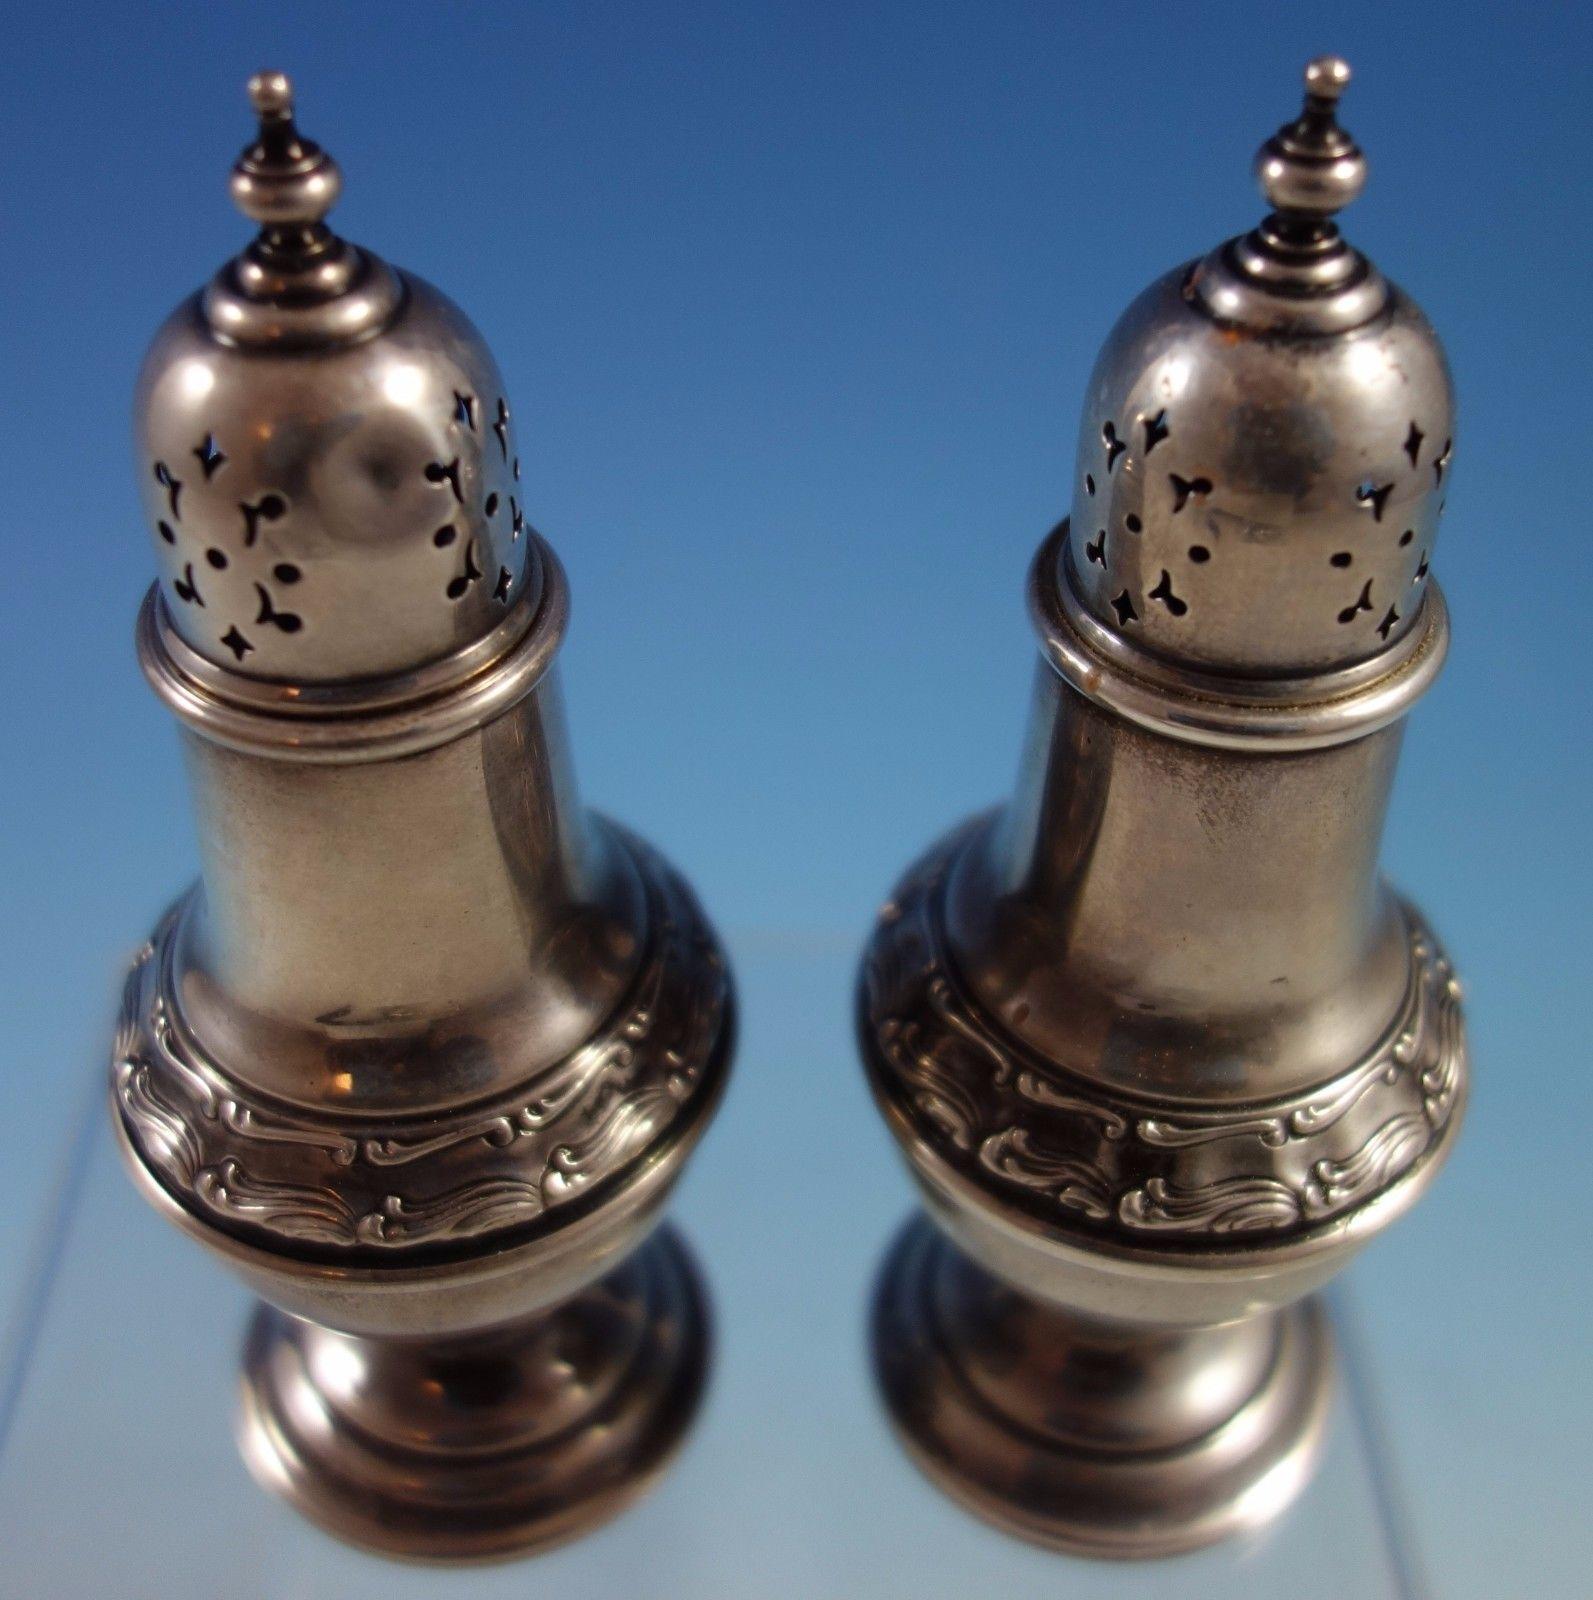 Buckingham by Gorham sterling silver salt and pepper shakers 2-piece set. The set is marked with #1178. The shakers measure 4